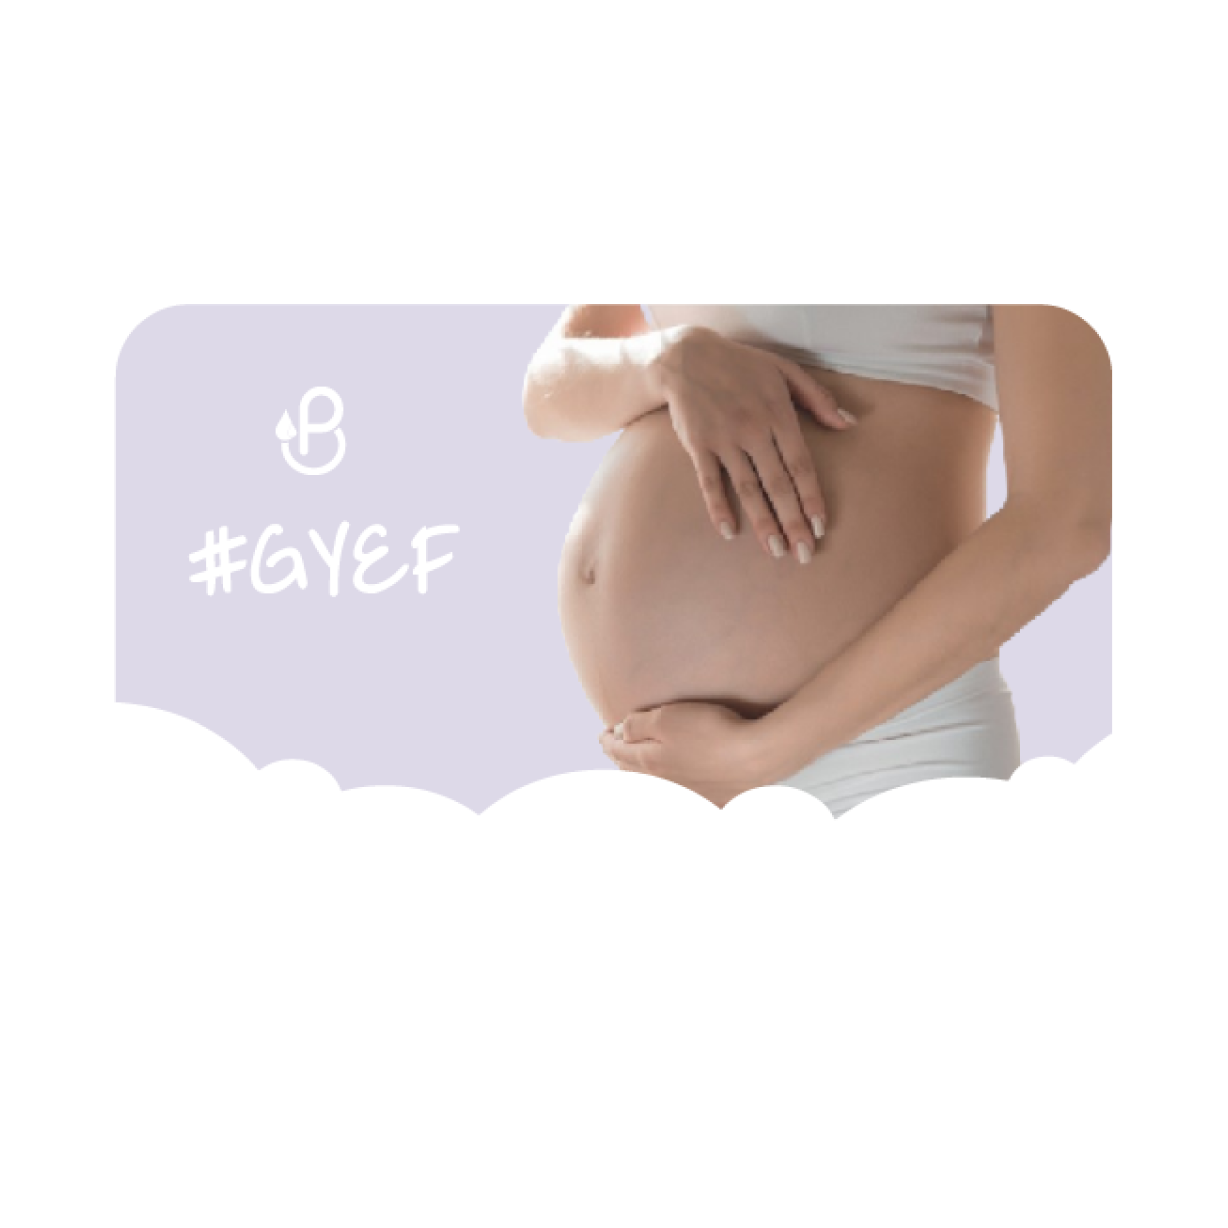 GYEF <3 Gift Your Expecting Friend - Single Pack Newborn Nappy